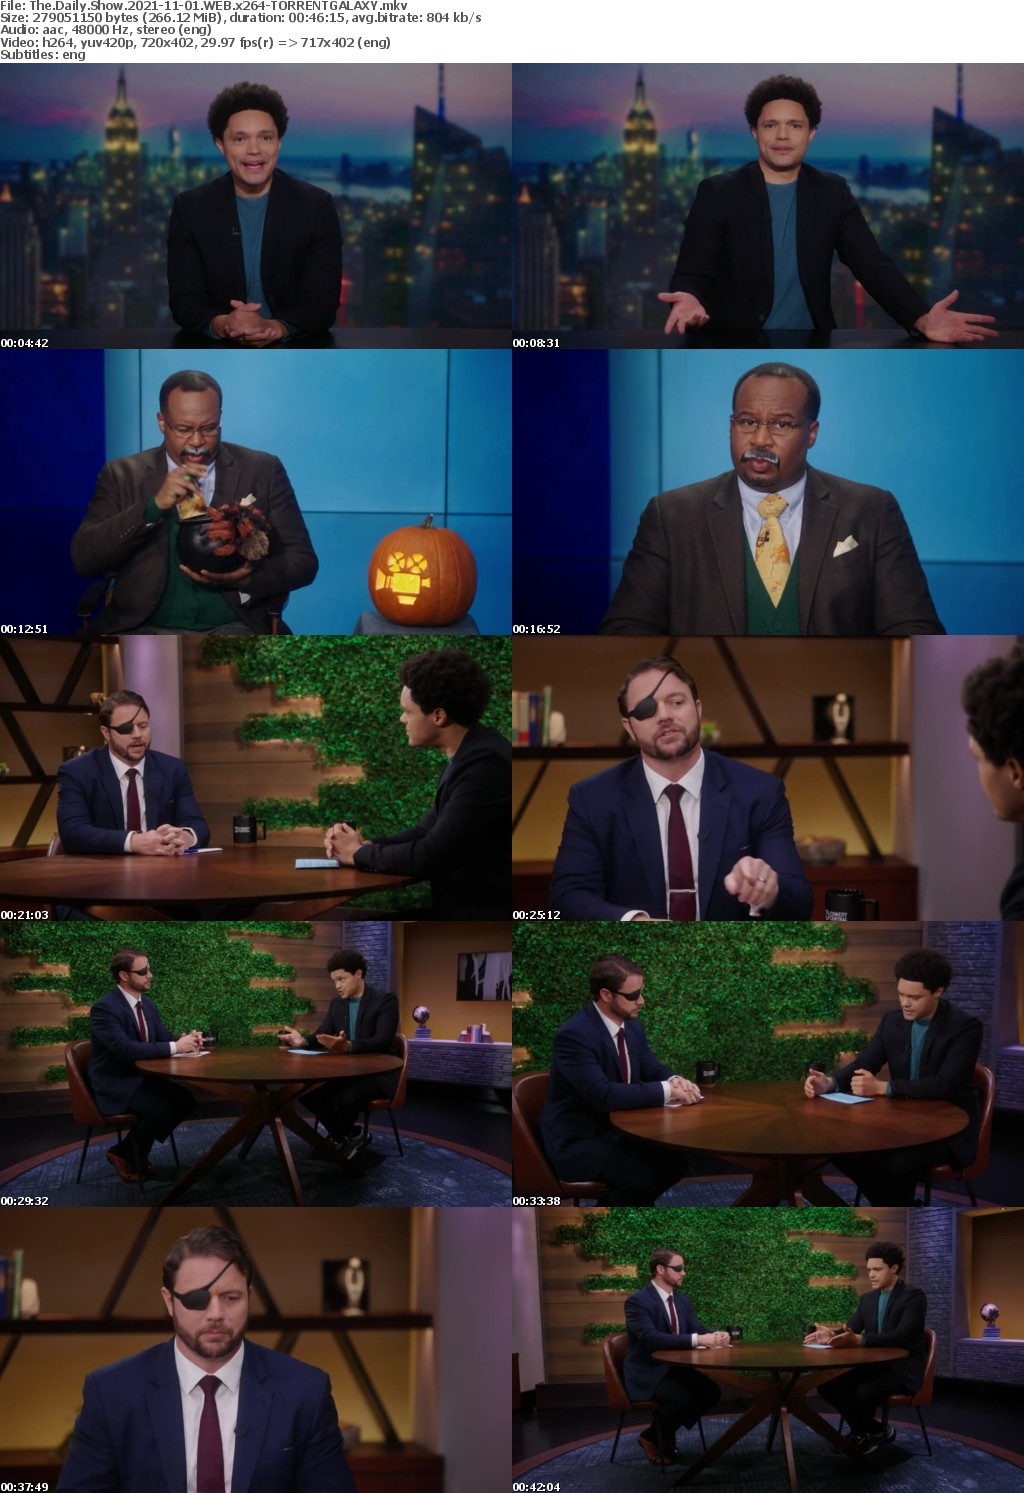 The Daily Show 2021-11-01 WEB x264-GALAXY